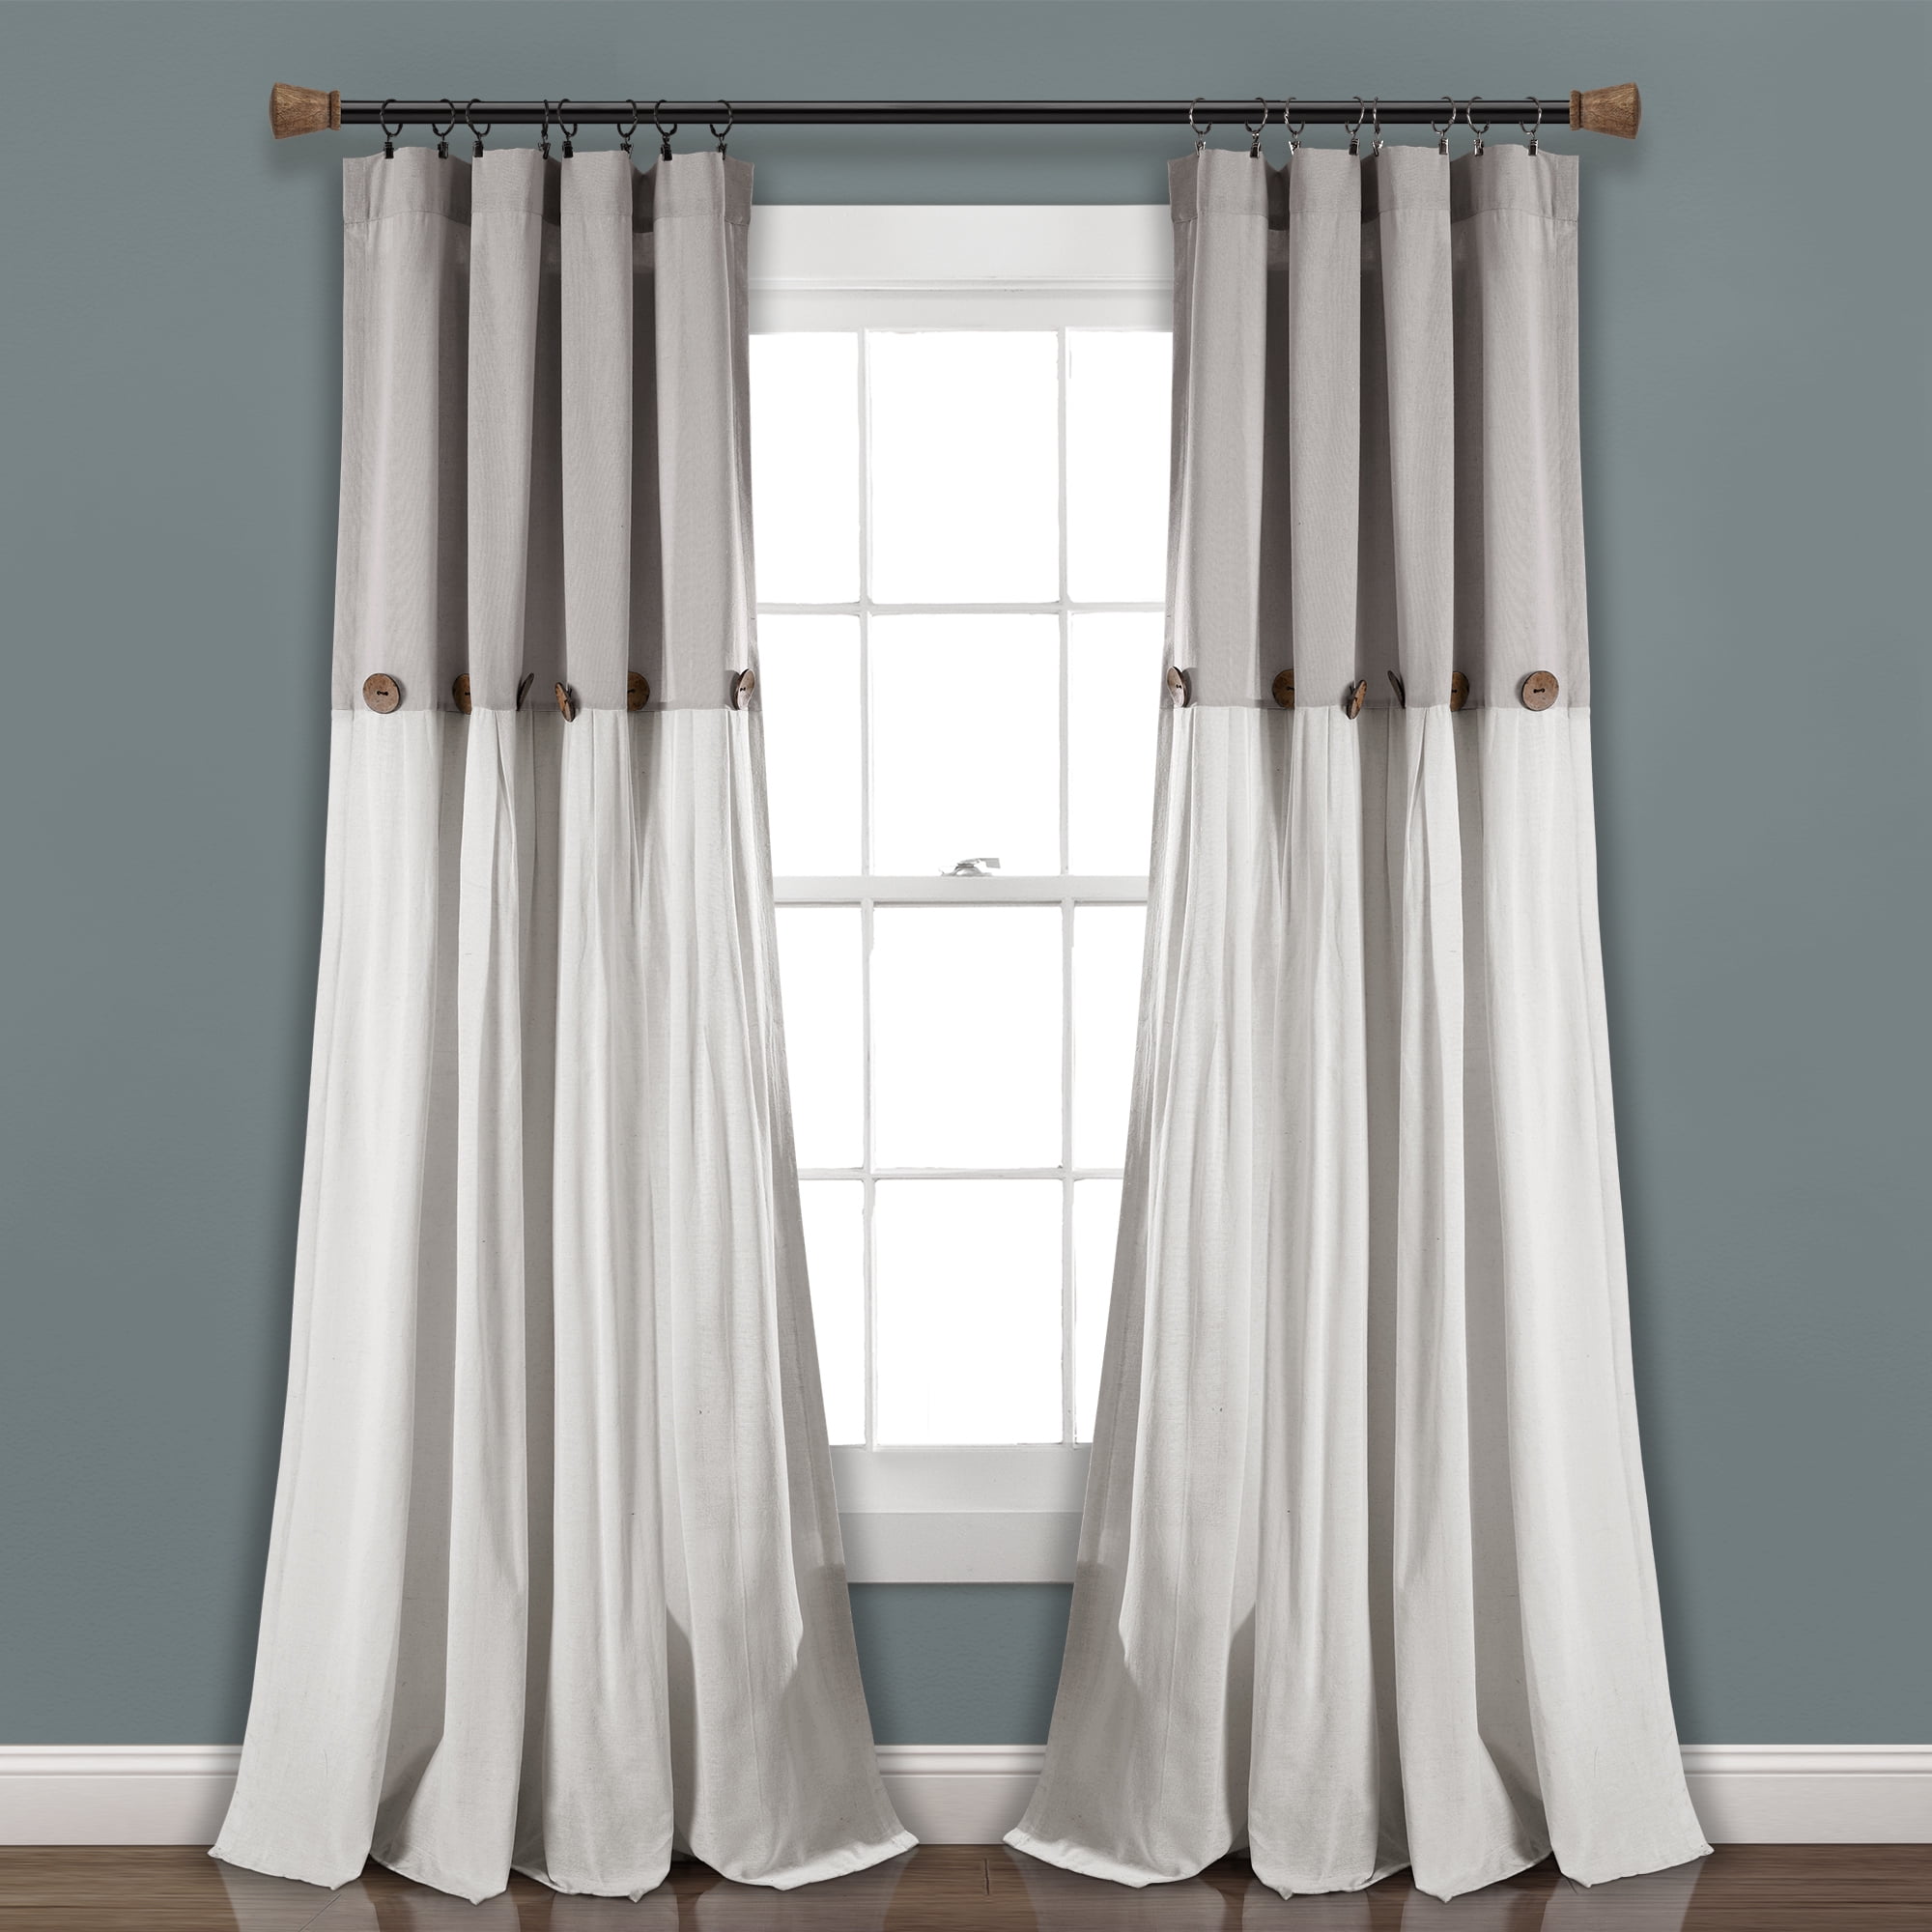 Native Fab Pure Slub Cotton Window Curtains 2 Panels 50x63 Curtains for Bedroom Living Room Kitchen Olive Green Farmhouse Curtains 63 Inch Length